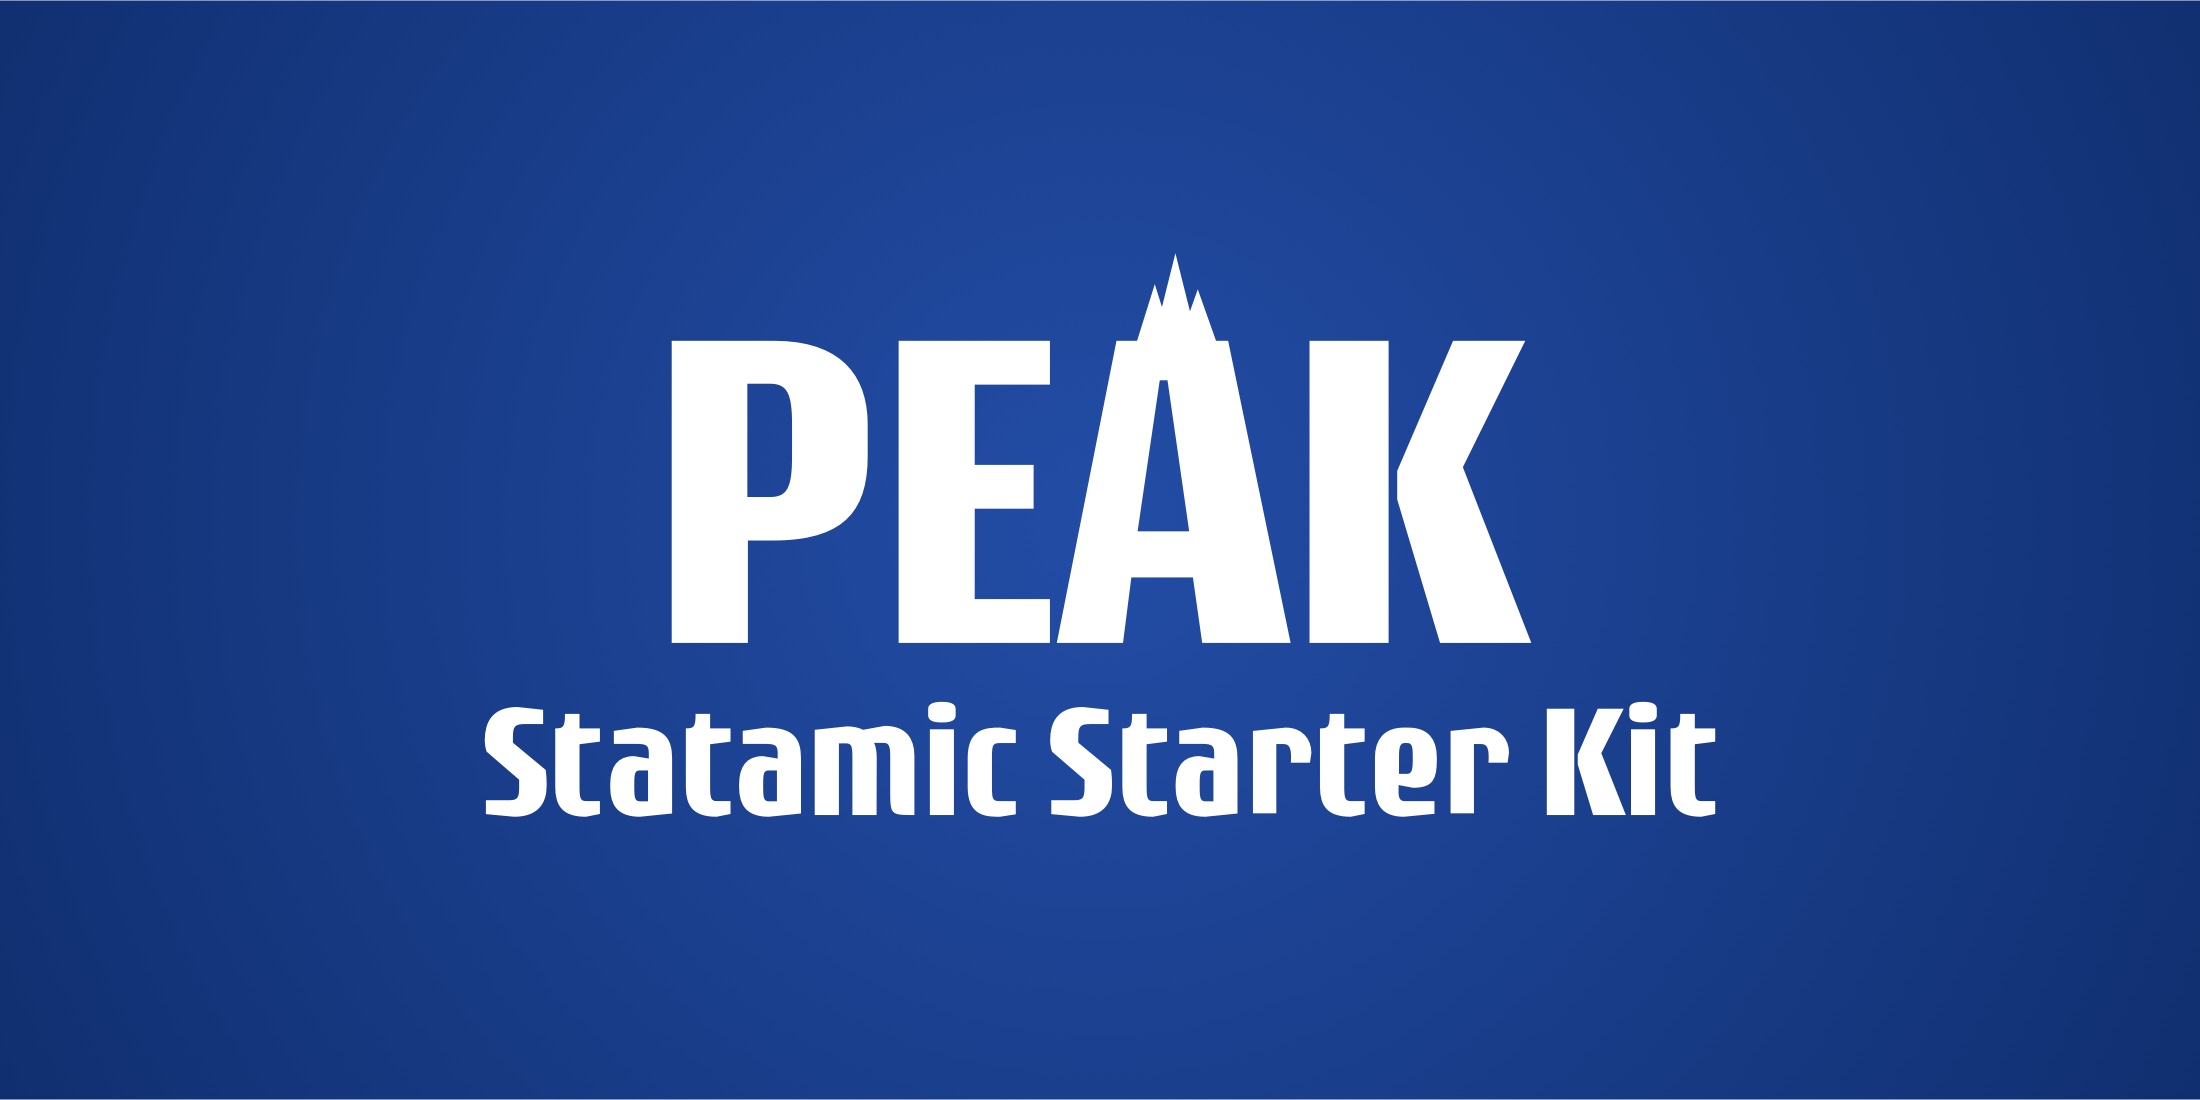 Efficiently create websites for clients with Statamic Peak image